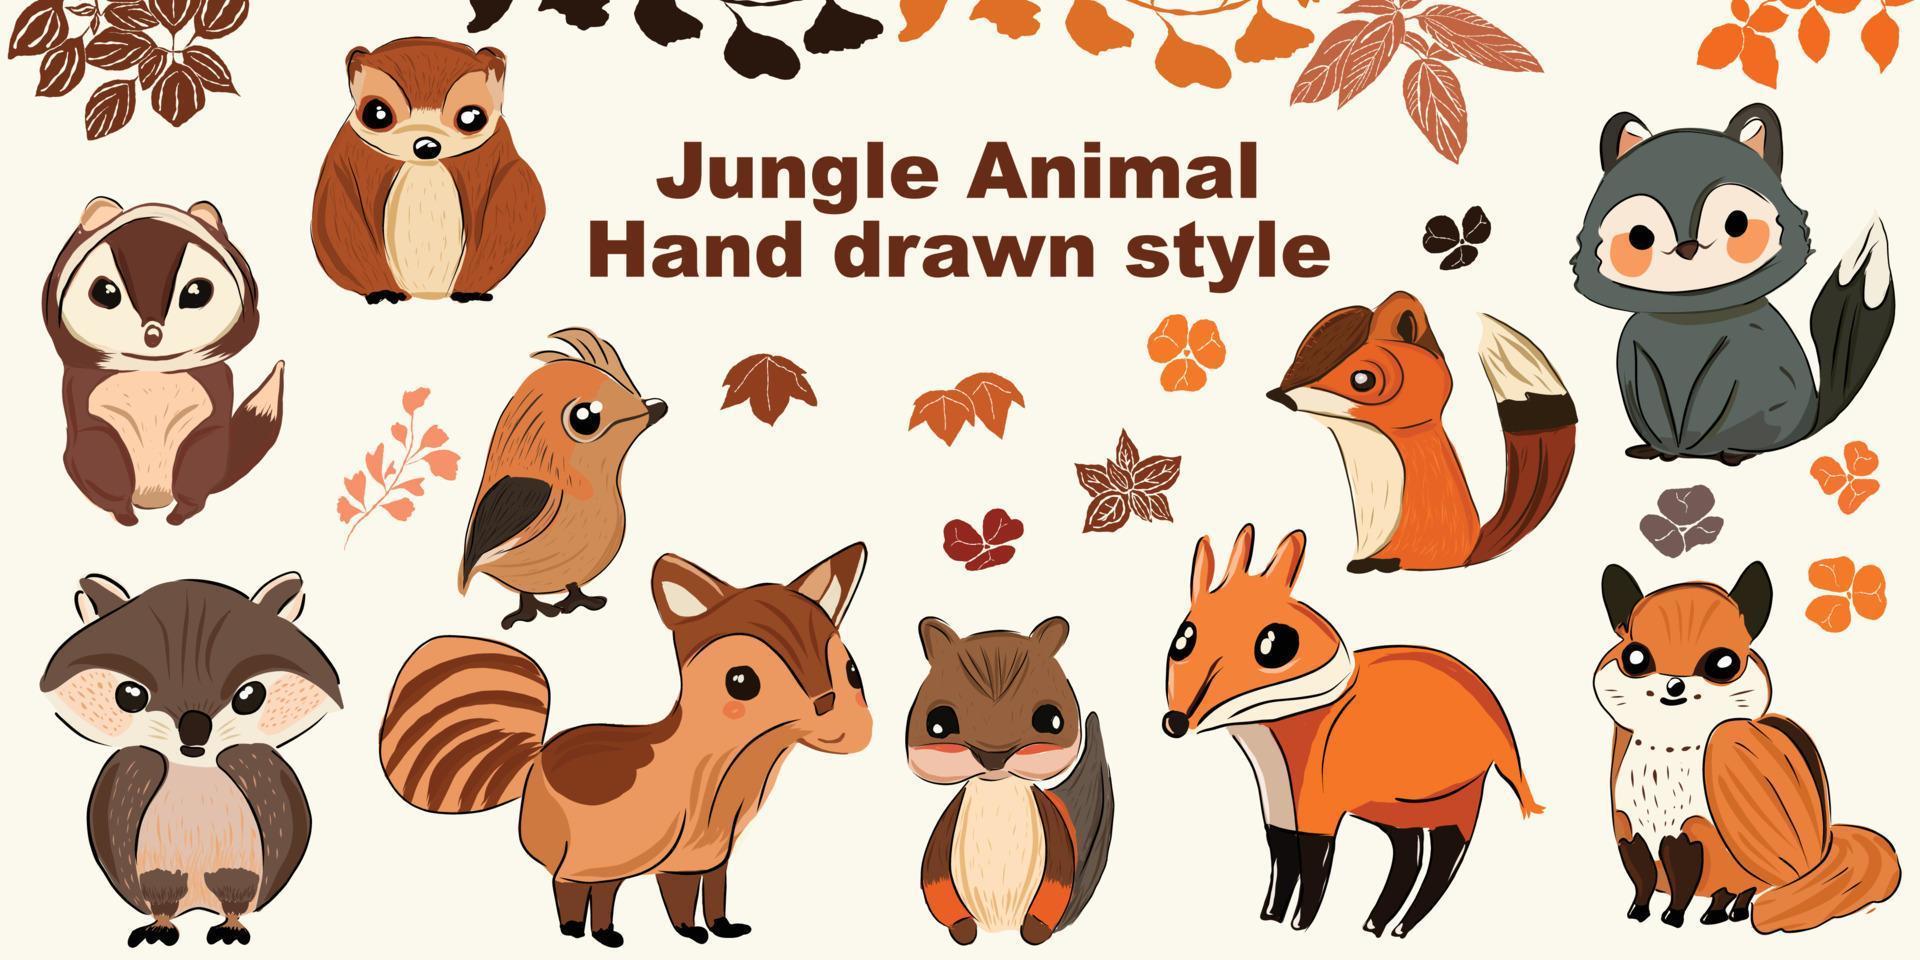 Bundle set Vector illustration of cute woodland forest animals including a bird, deer, fox, raccoon, hedgehog, squirrel and more